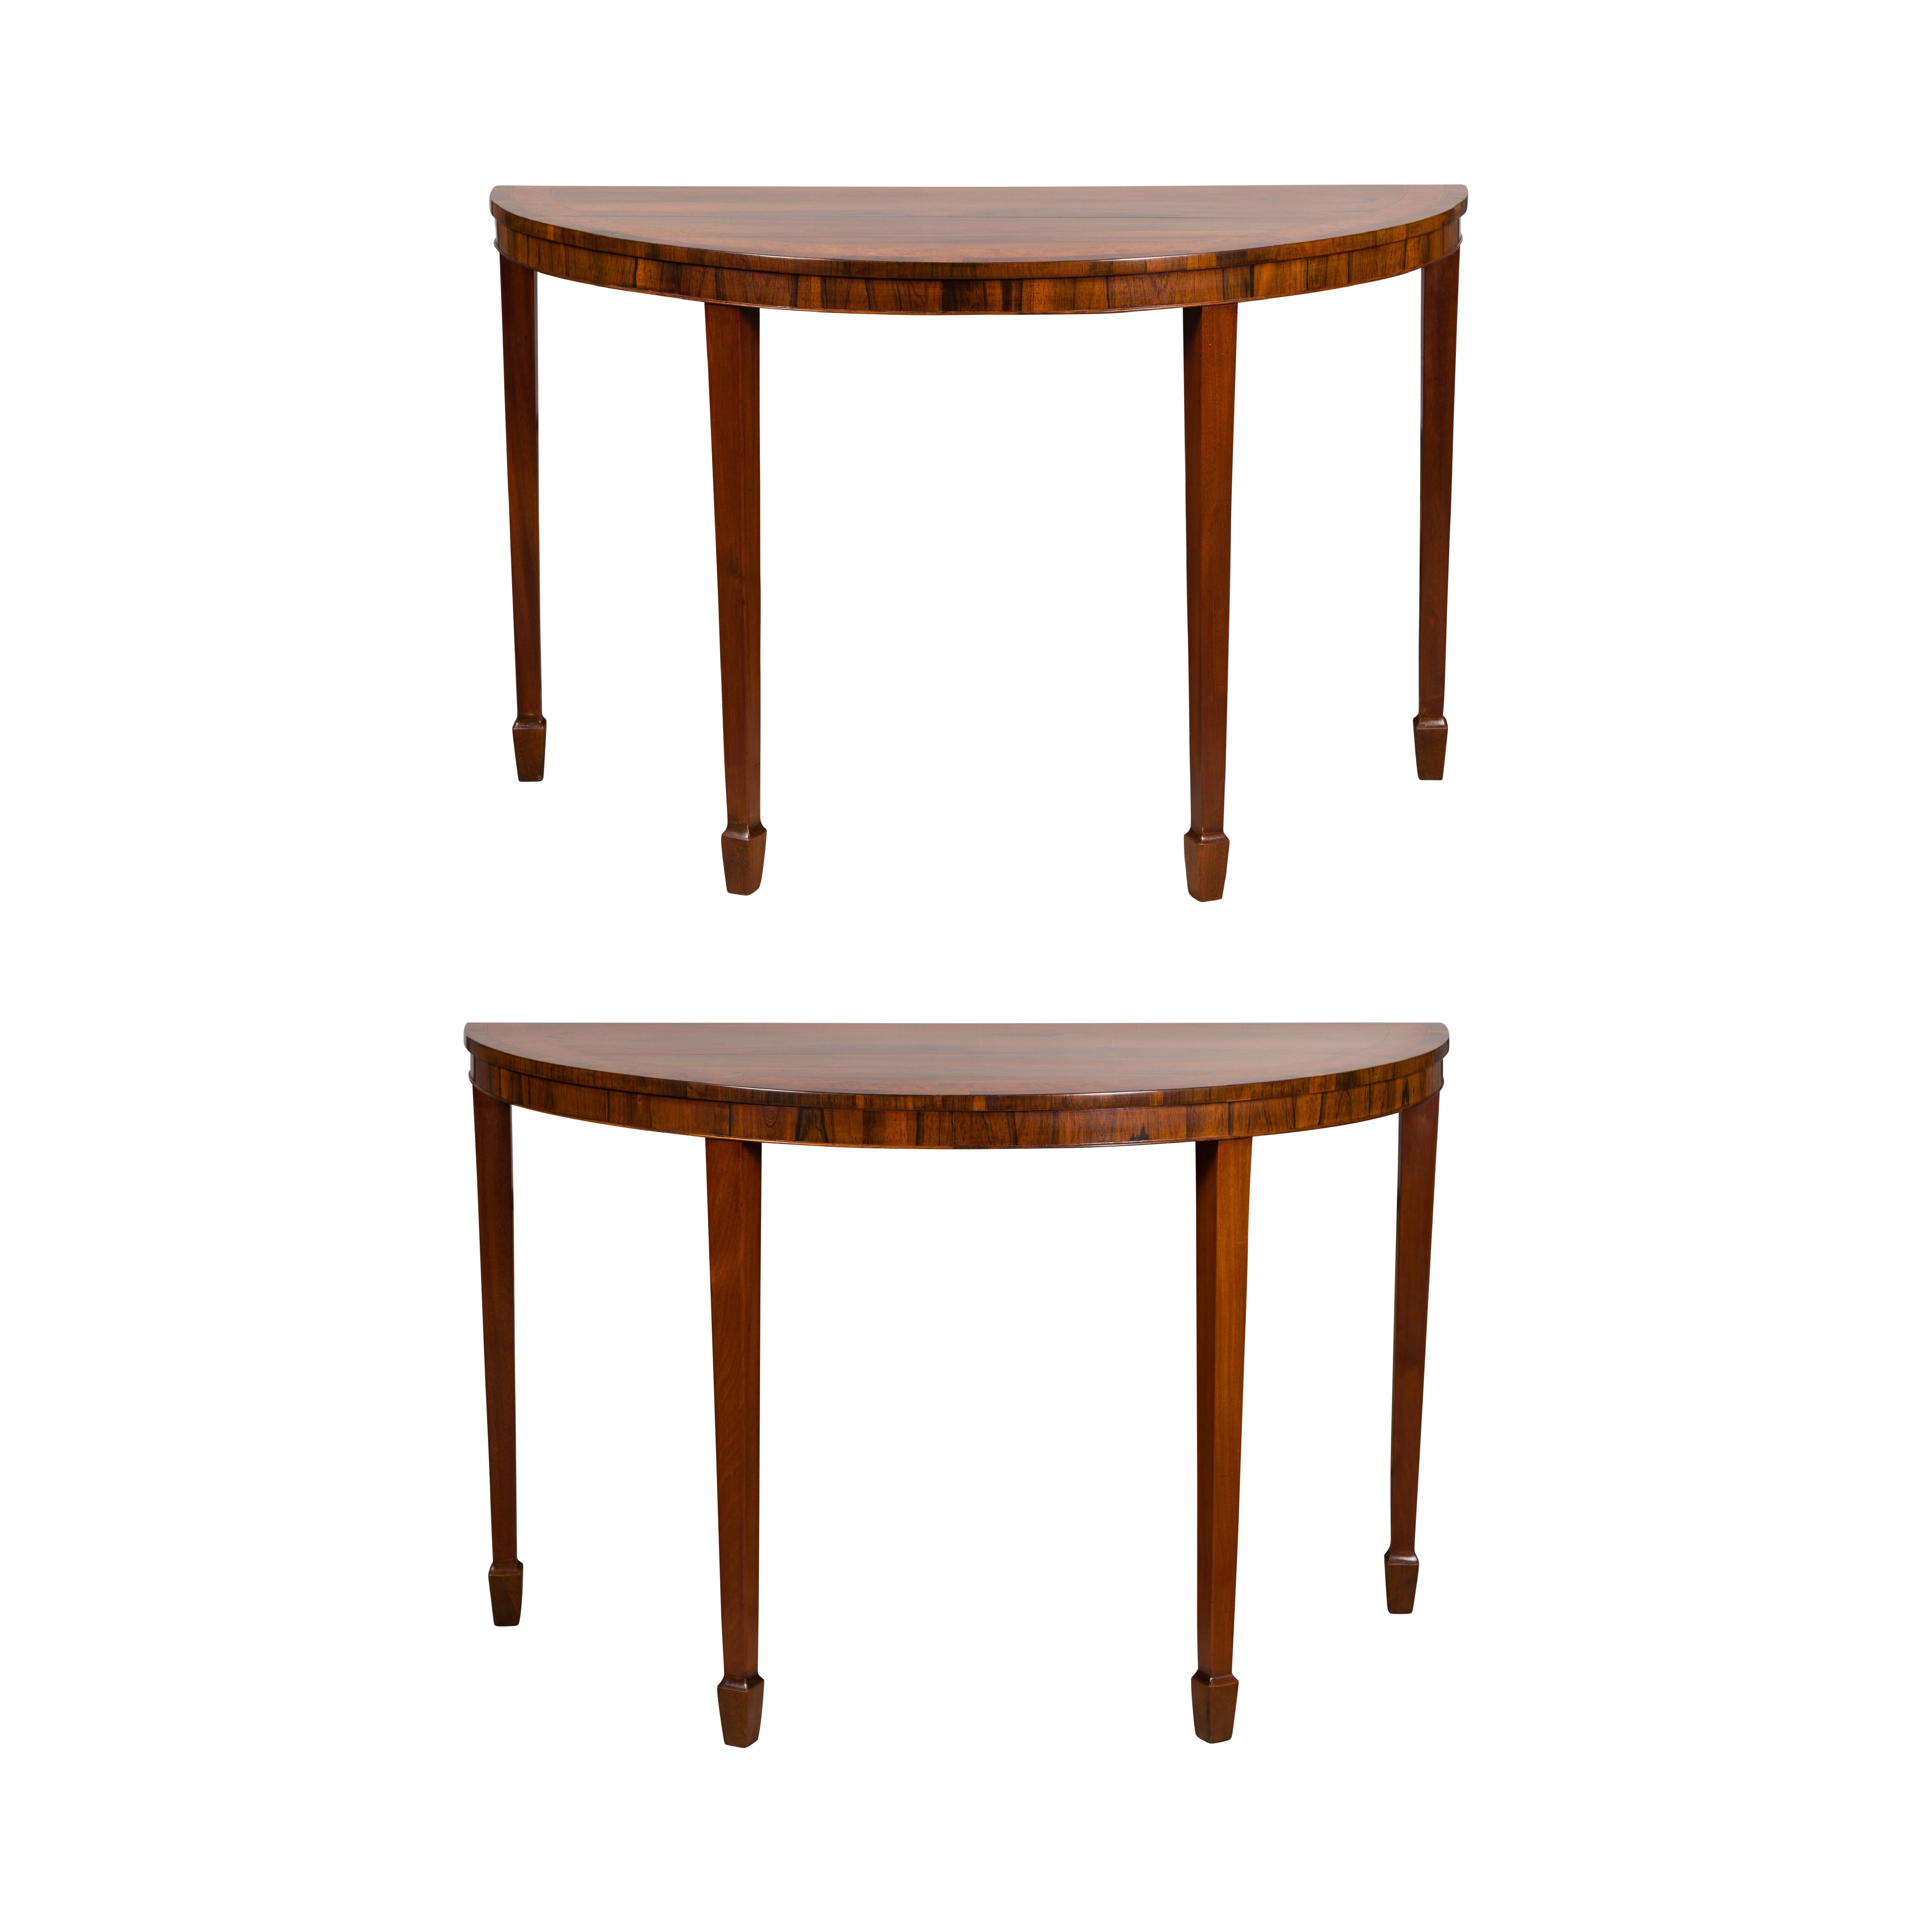 English 19th Century Mahogany Demilune Console Tables with Tapered Legs, a Pair For Sale 11